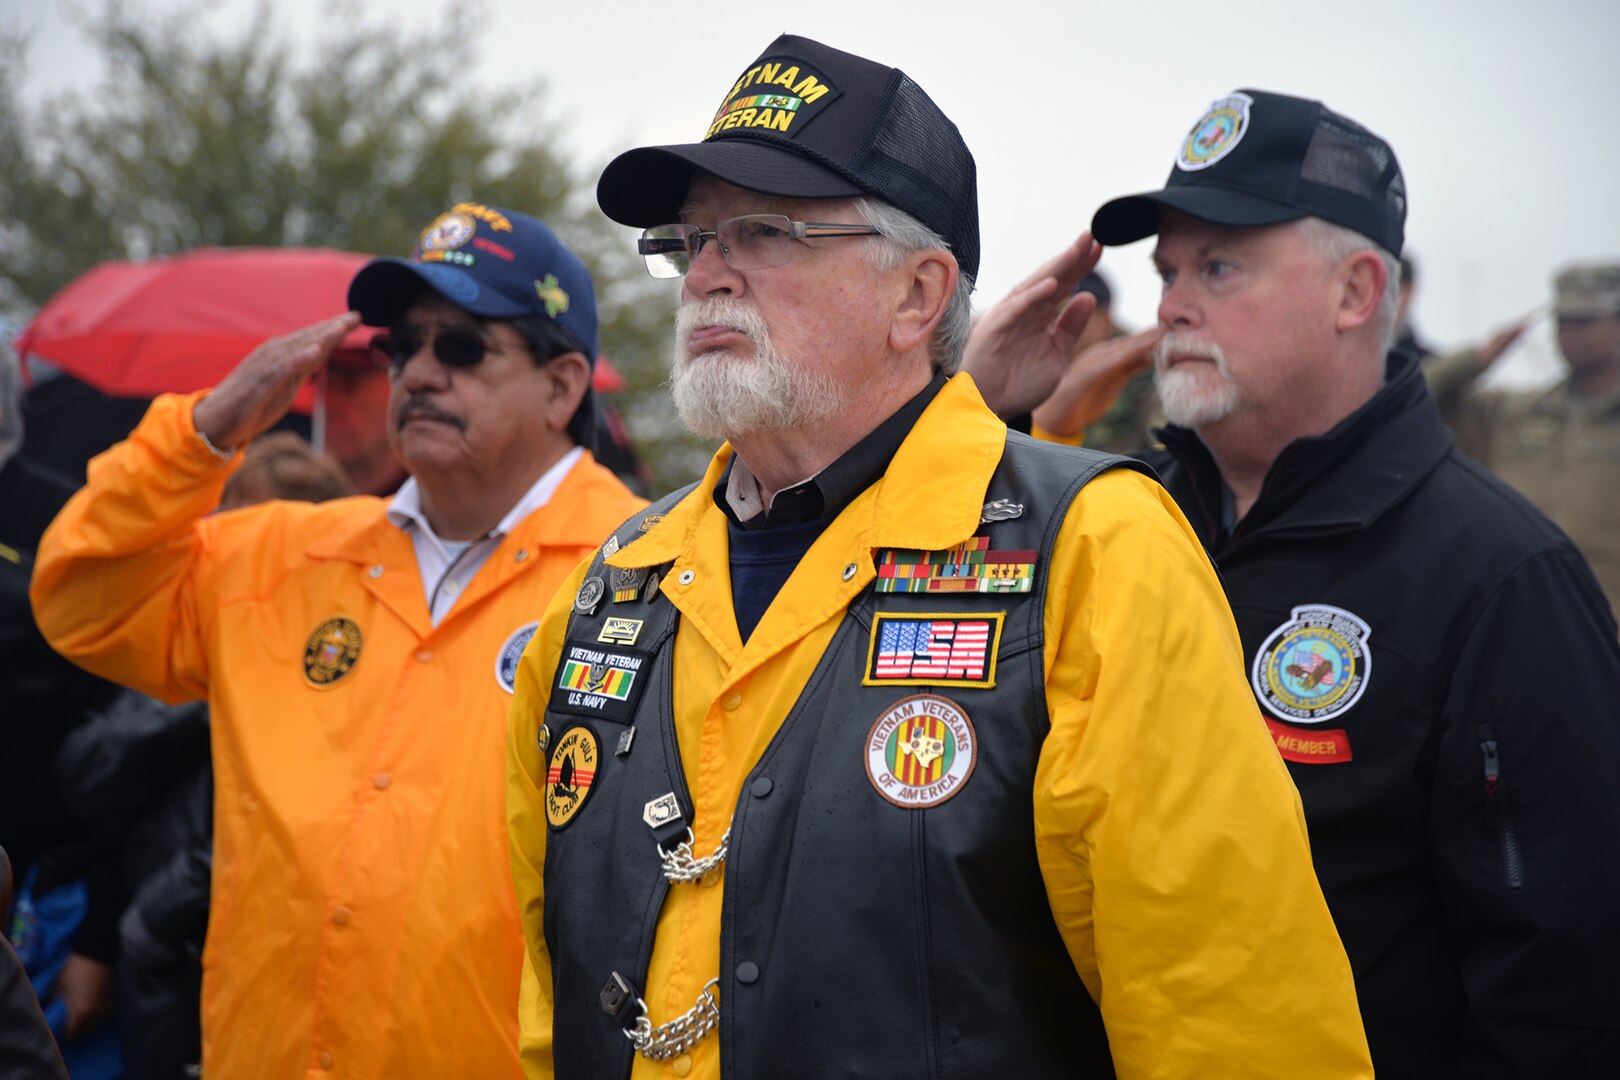 Vietnam War-era Navy veterans pay their respects at the start of the opening ceremonies for "The Wall That Heals" display Feb. 28 at the Fort Sam Houston National Cemetery. Dozens of Vietnam War-era veterans, their families and many others turned out to pay tribute to those who never came home. The Daughters of the American Revolution’s Alamo Chapter hosted “The Wall That Heals,” a traveling representation of the Vietnam Veterans Memorial, at the cemetery Feb. 28 through March 3.